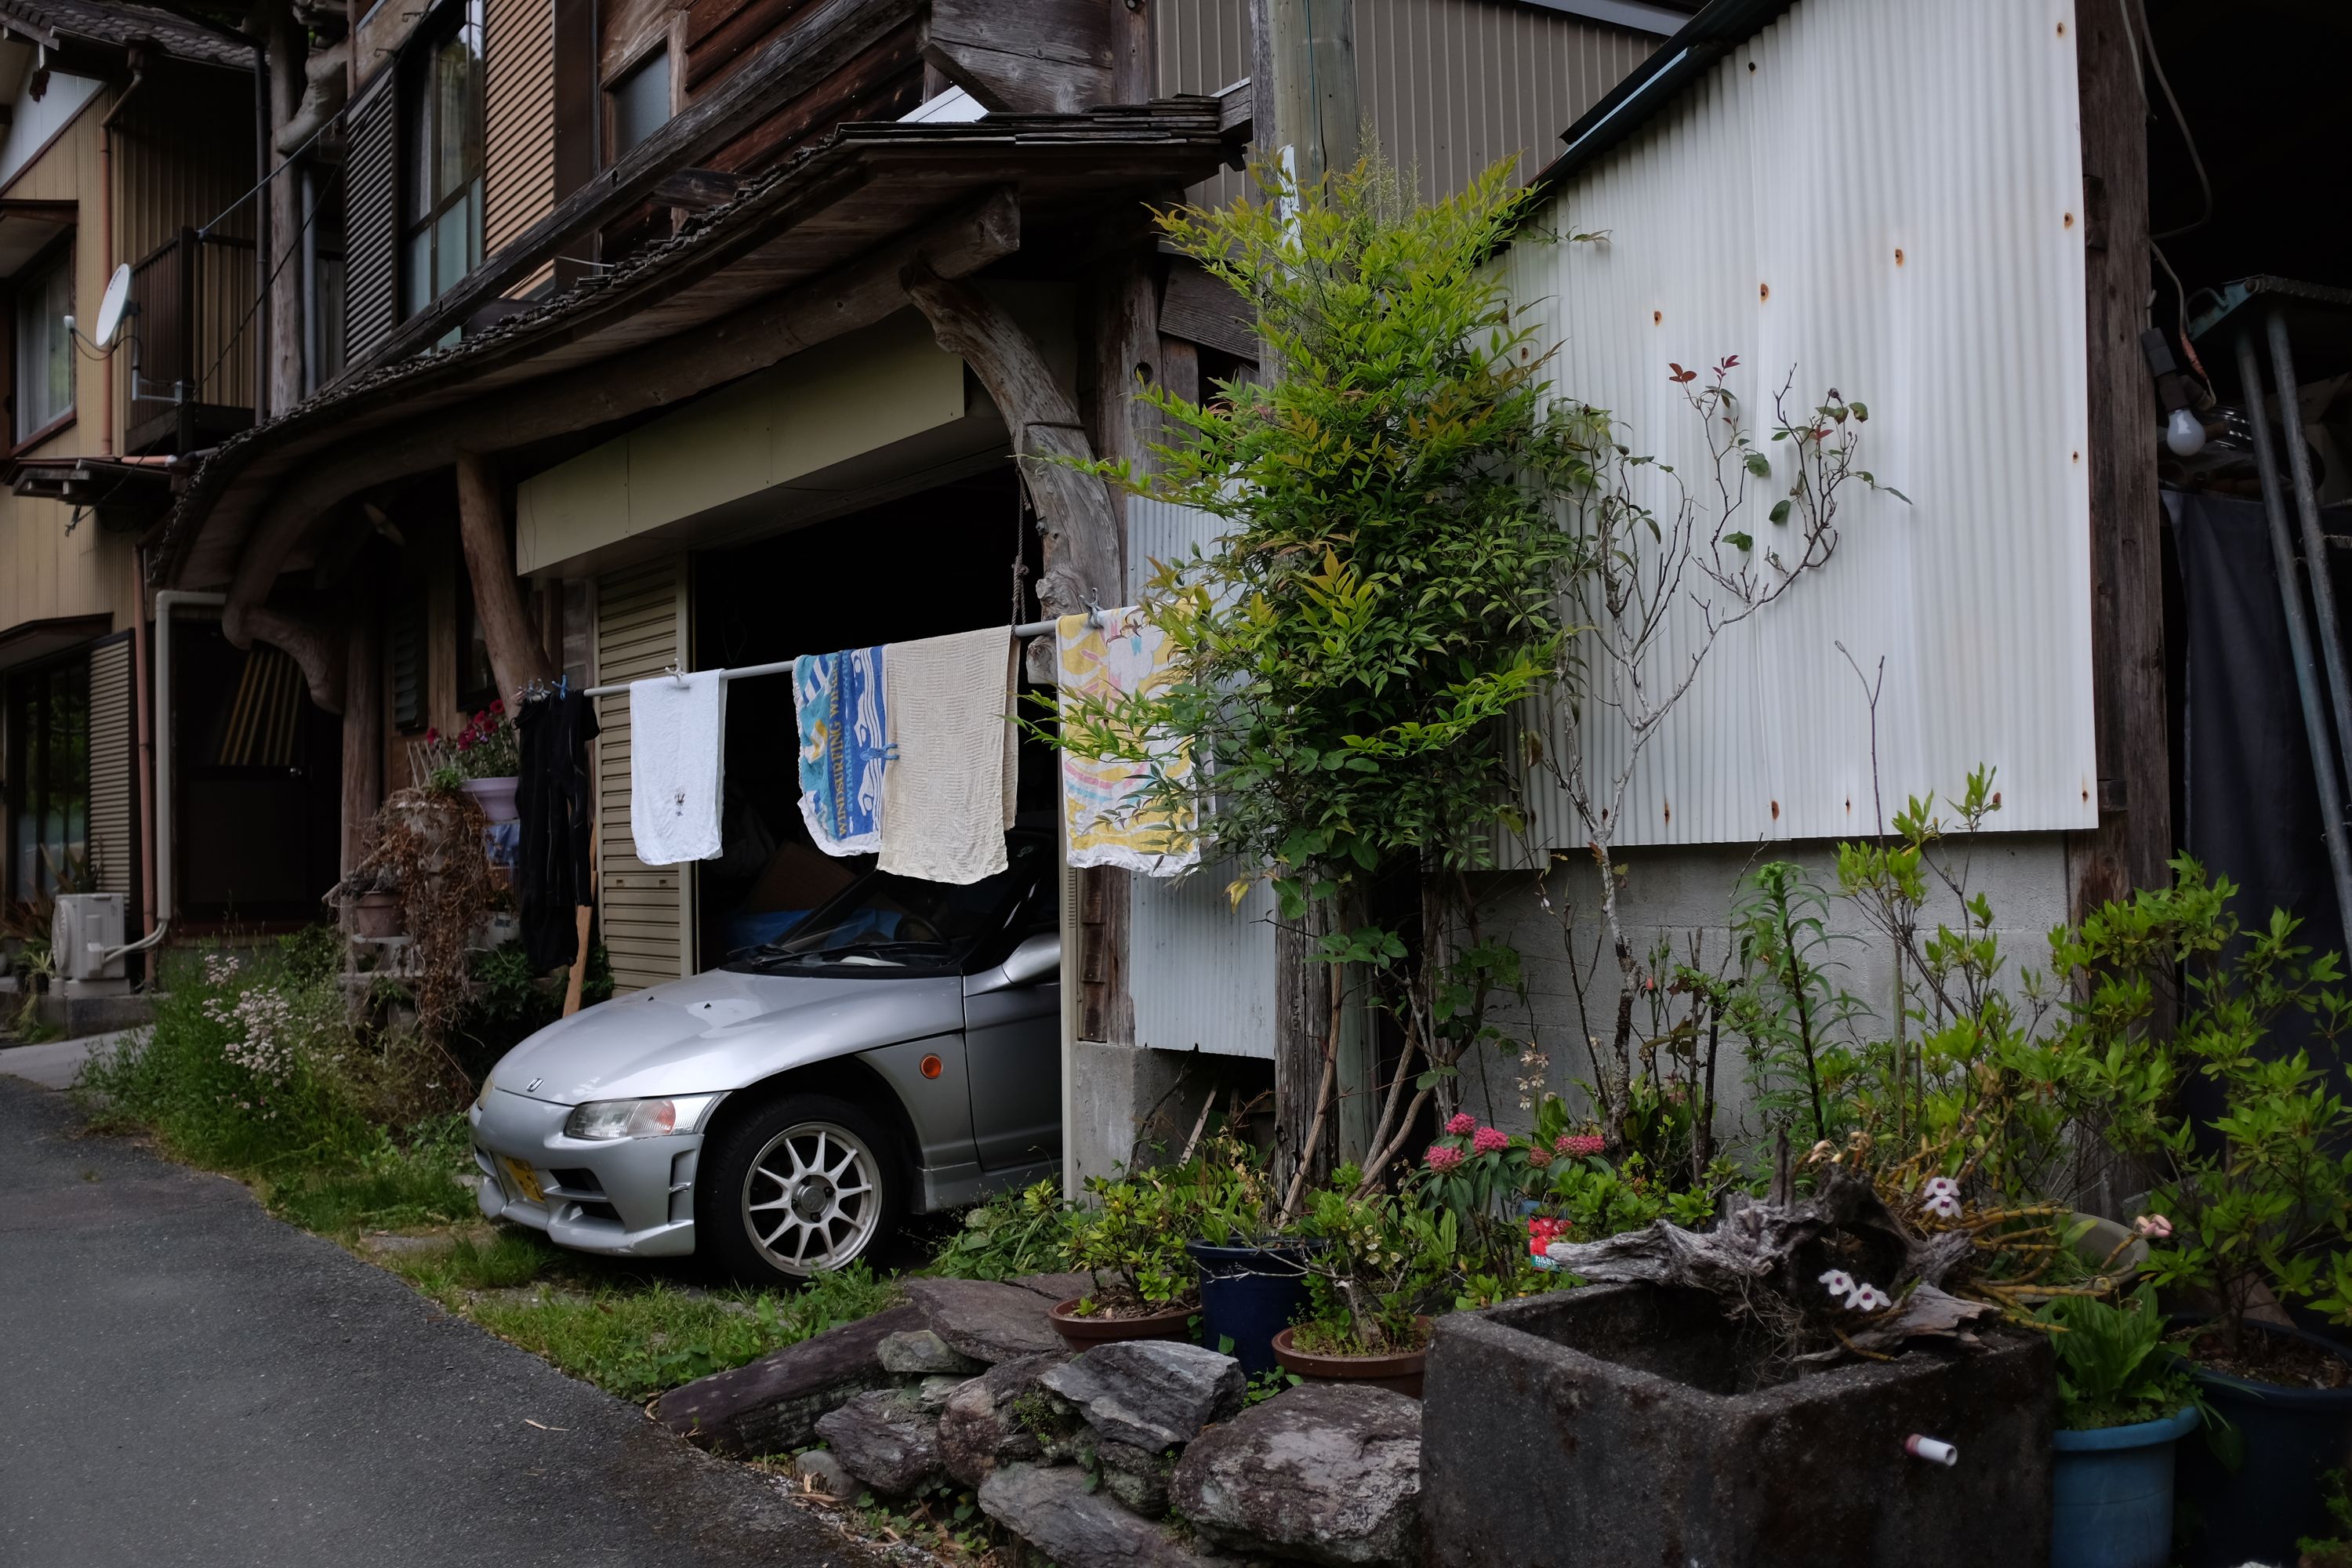 A Honda Beat roadster peeks out of a garage in a village house, the kind with hand-made windowframes, a small rock garden in front, and laundry hung across the garage’s entrance.